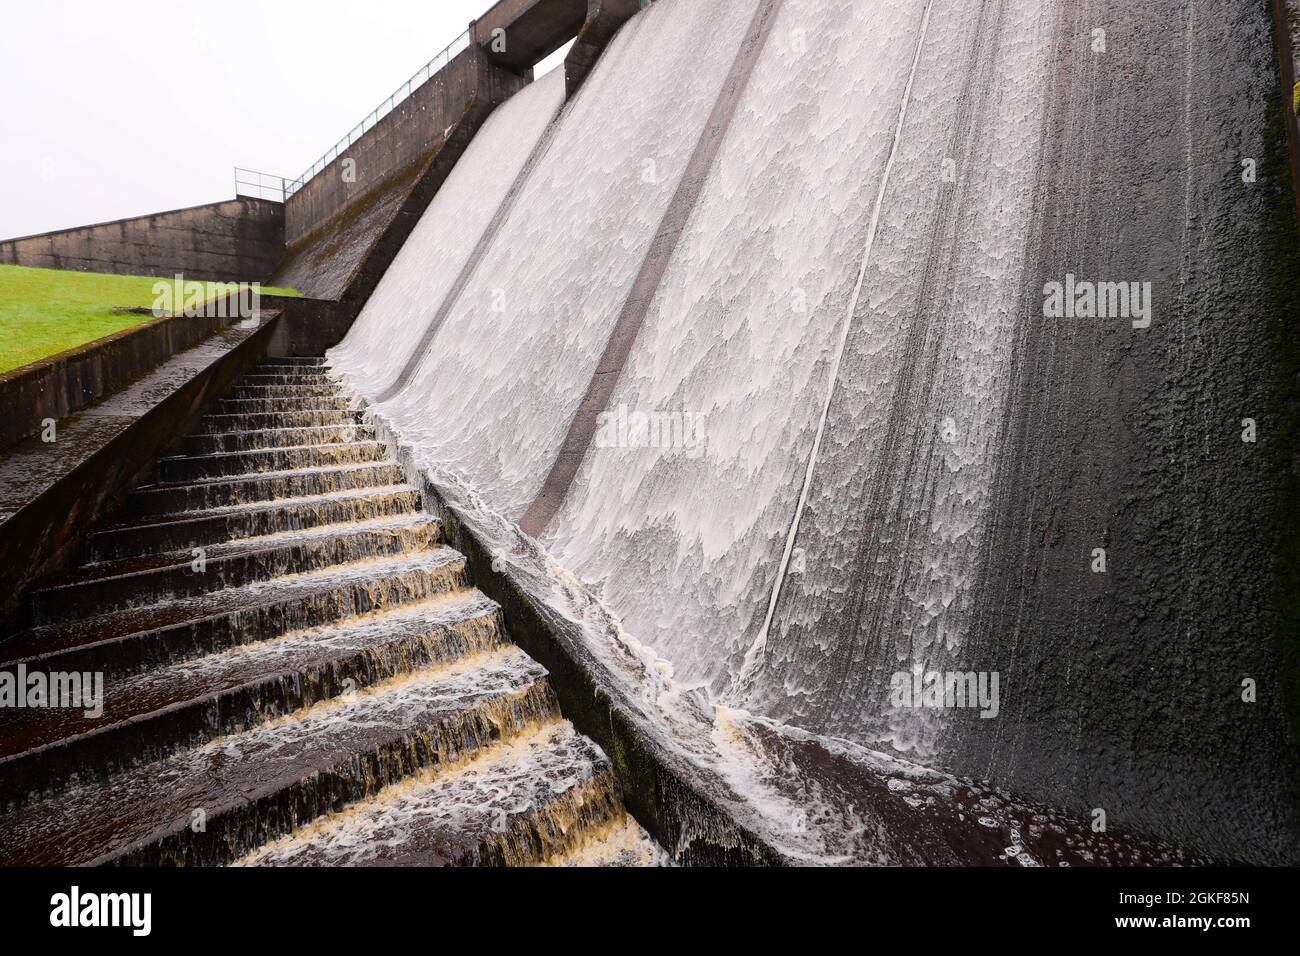 Altarichard Dam on the River Bush in County Antrim, Northern Ireland.  The dam is part of the Northern Ireland Water infrastructure. Stock Photo